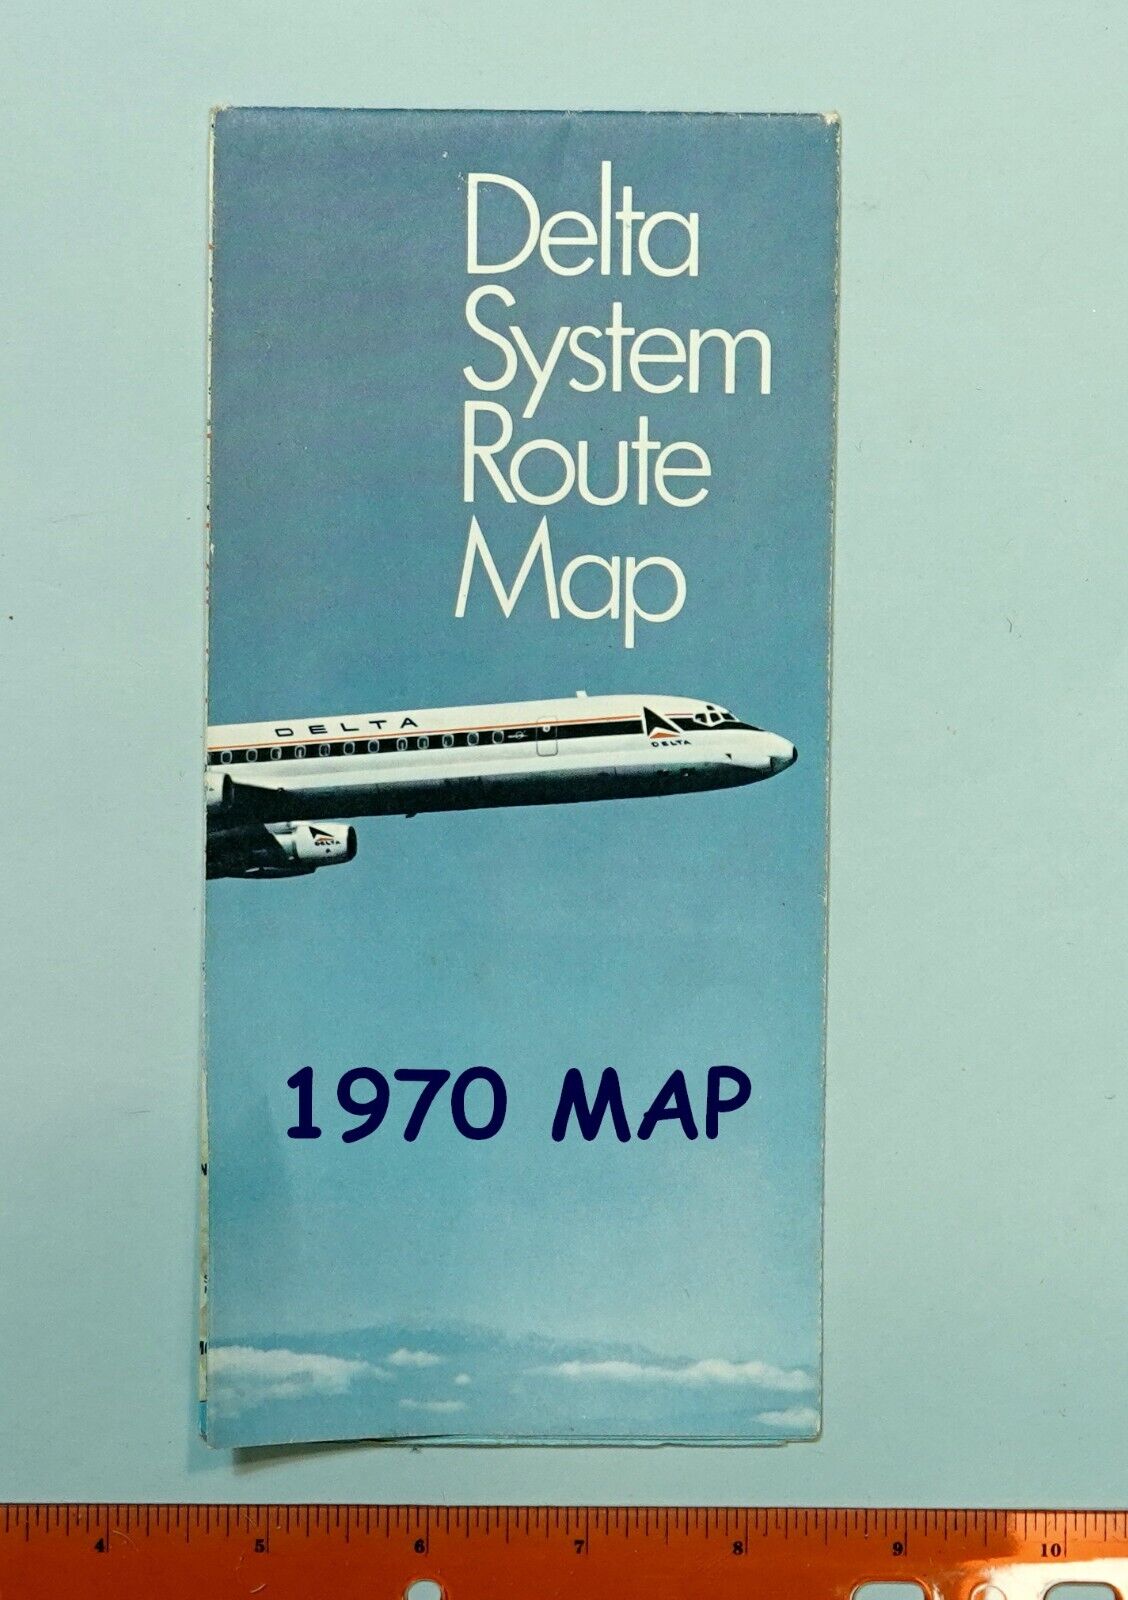 Delta System Air Route Map / 1970 / Delta Airlines